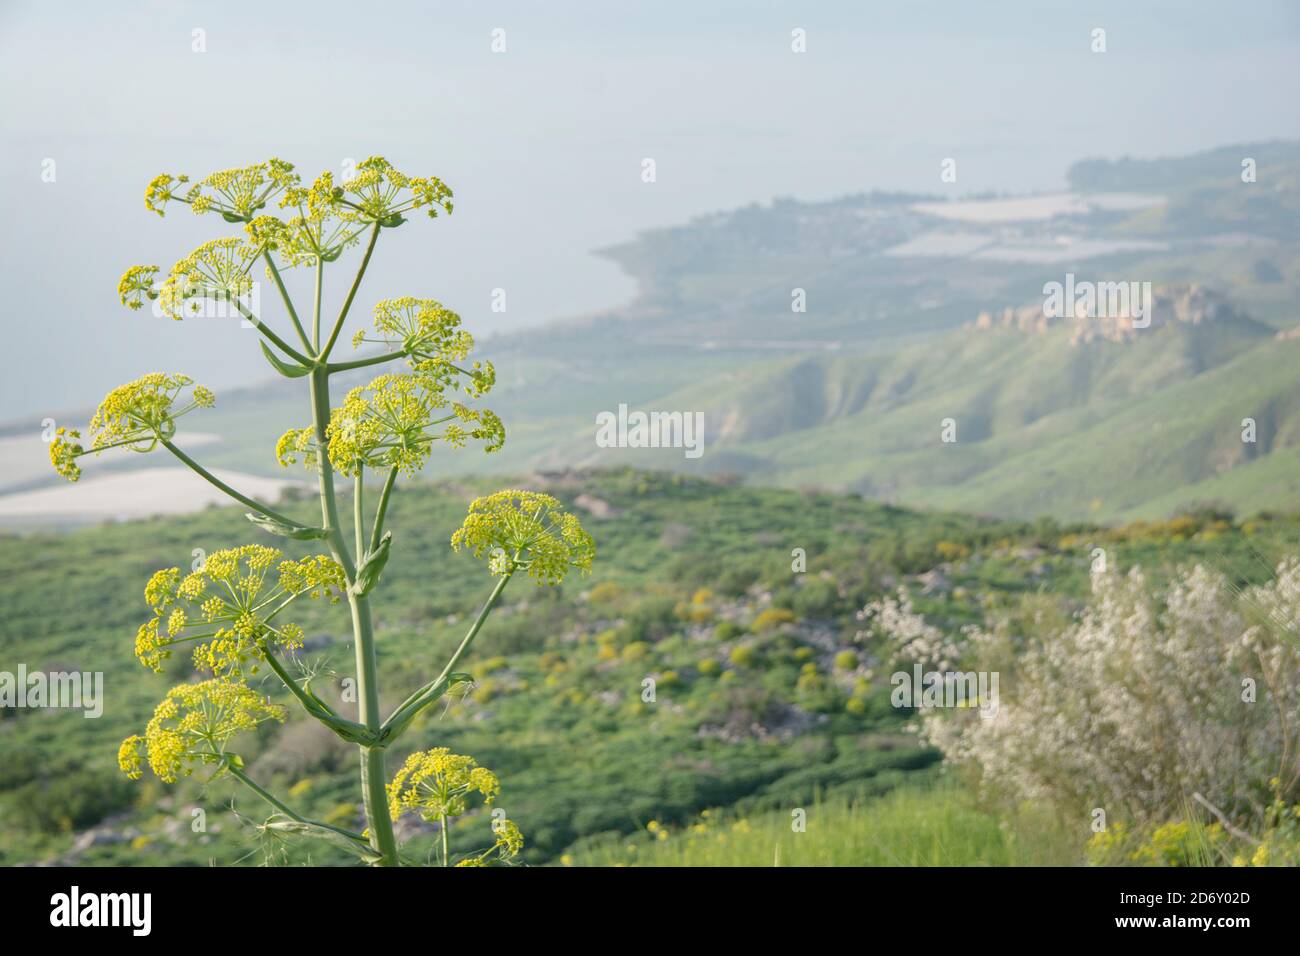 The giant fennel (Ferula communis), in the landscape of the Golan Heights, Israel Stock Photo